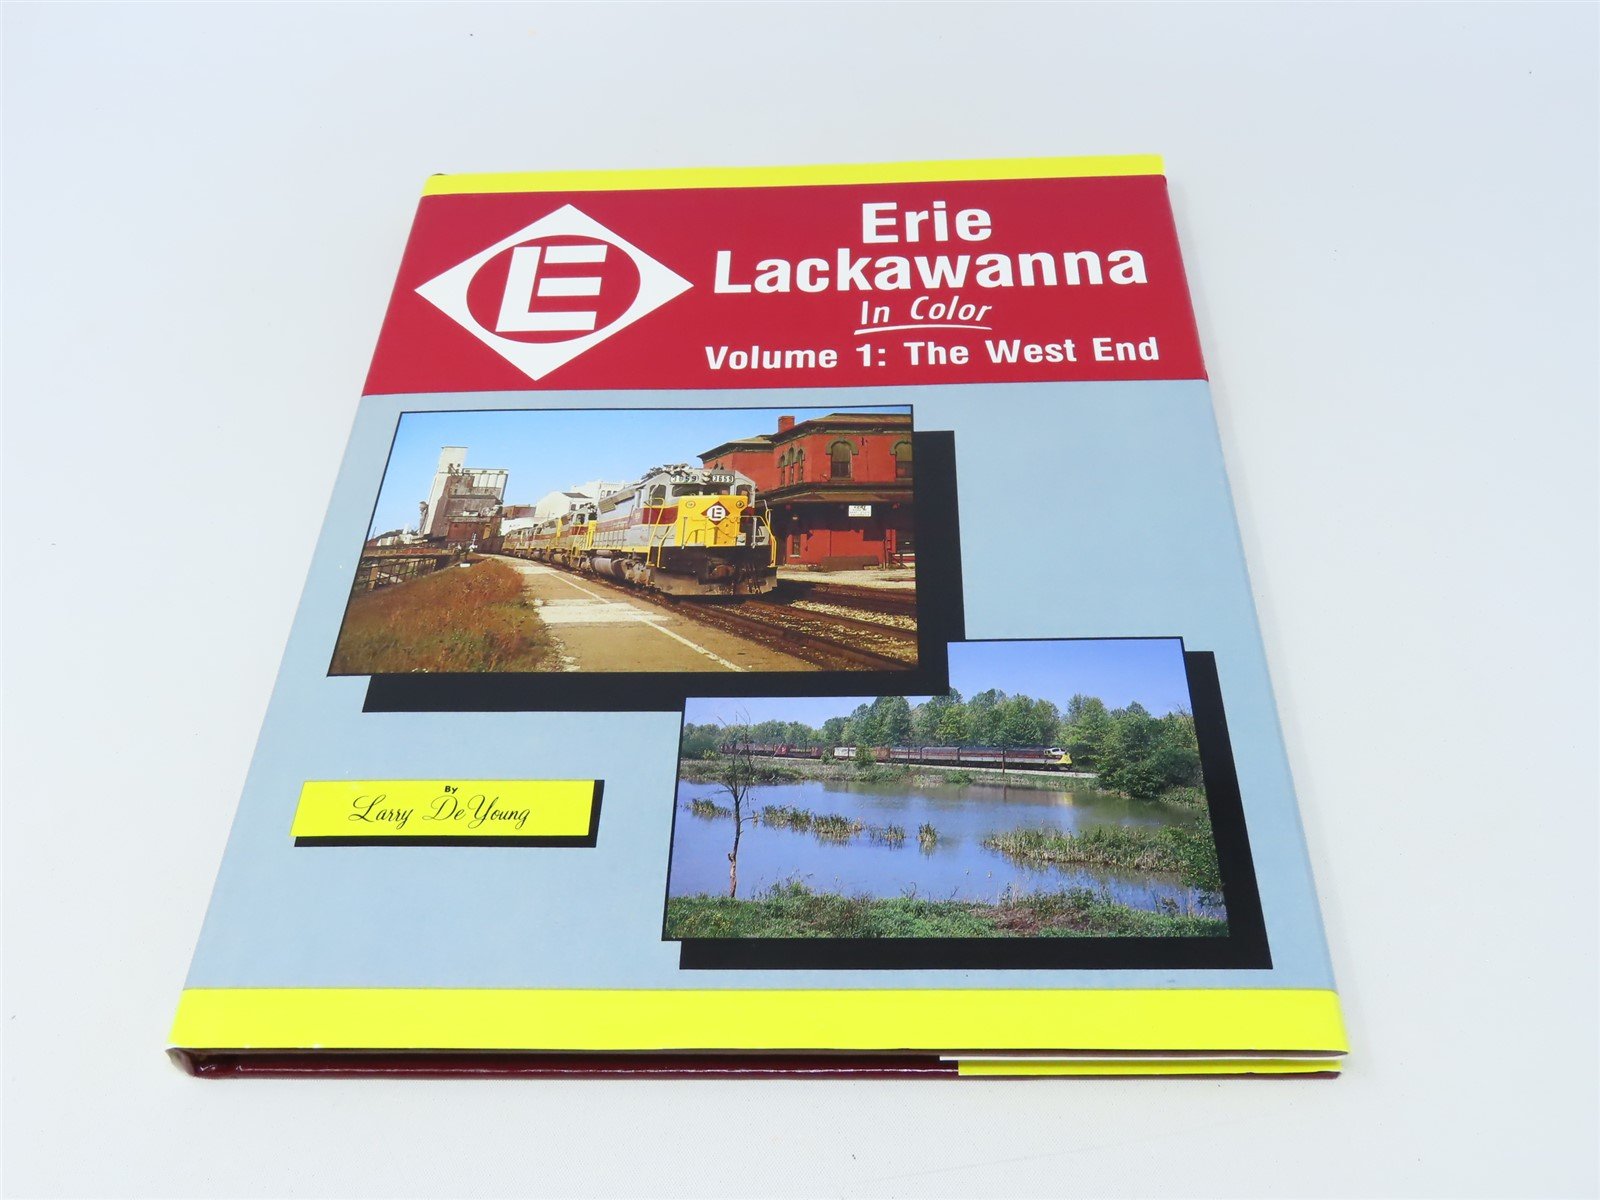 Morning Sun Erie Lackawanna Volume 1: The West End by L. DeYoung ©1991 HC Book